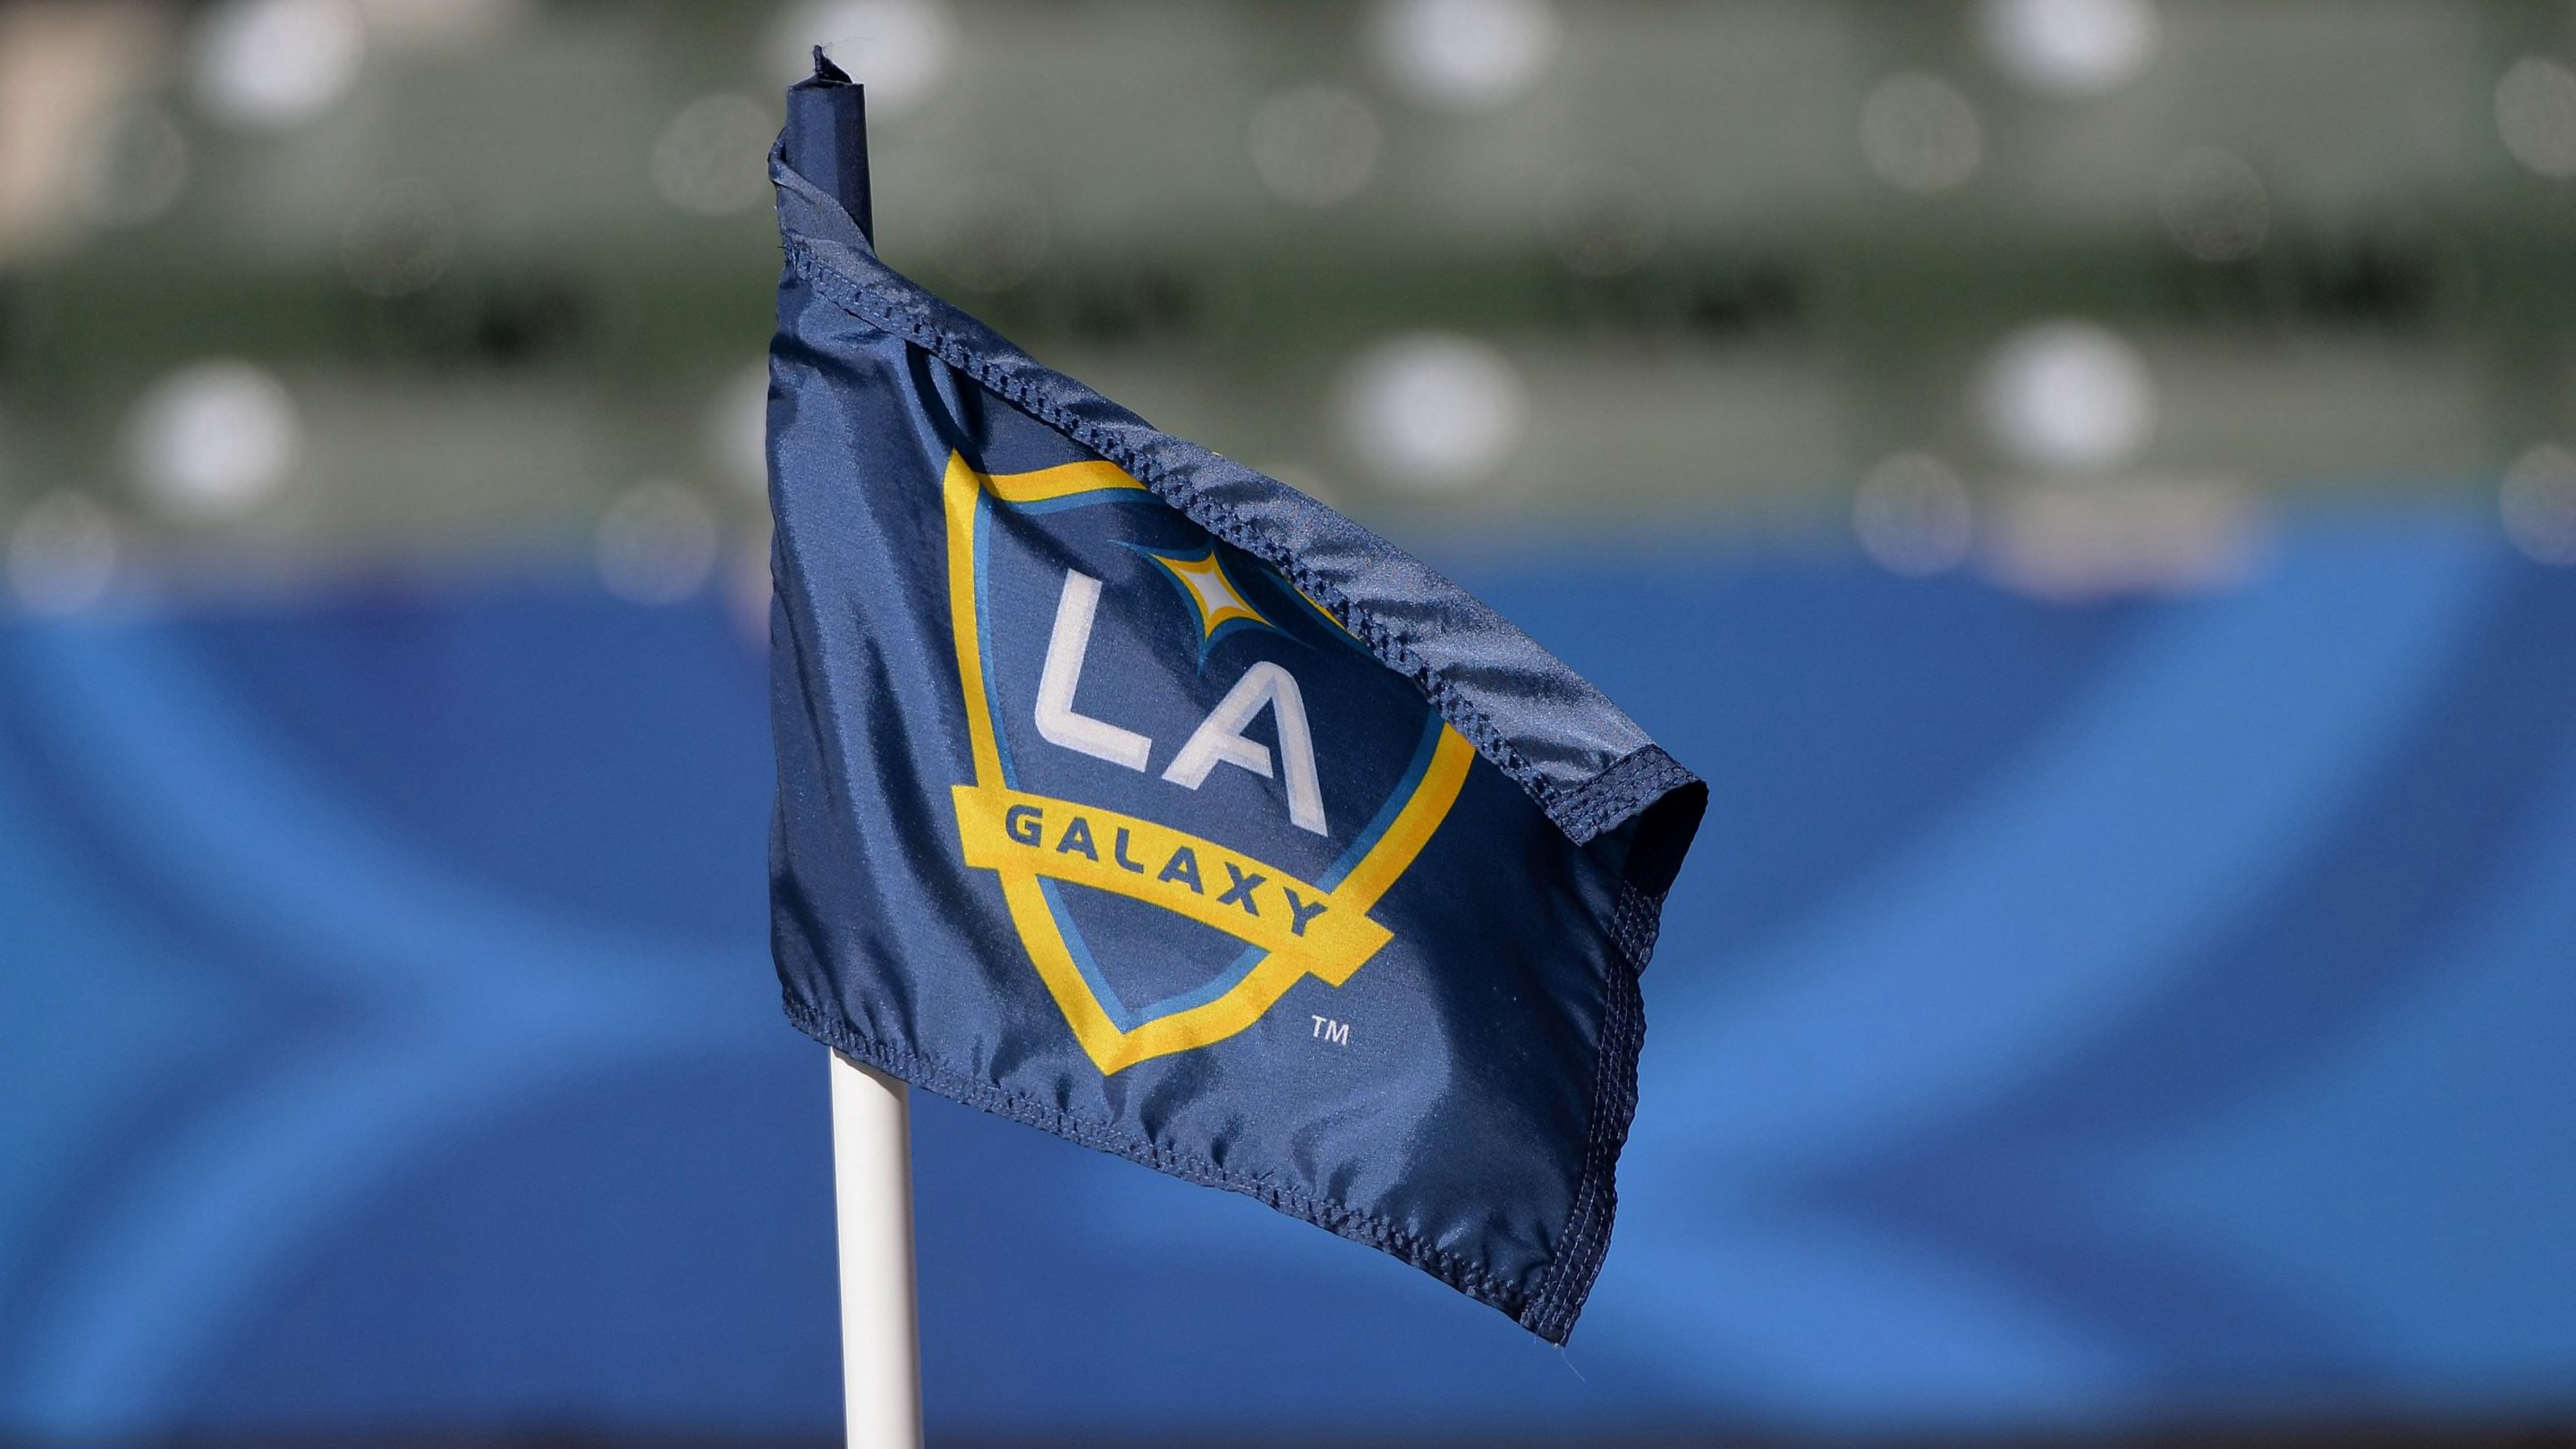 LA Galaxy sanctioned by MLS for violating salary budget and roster guidelines